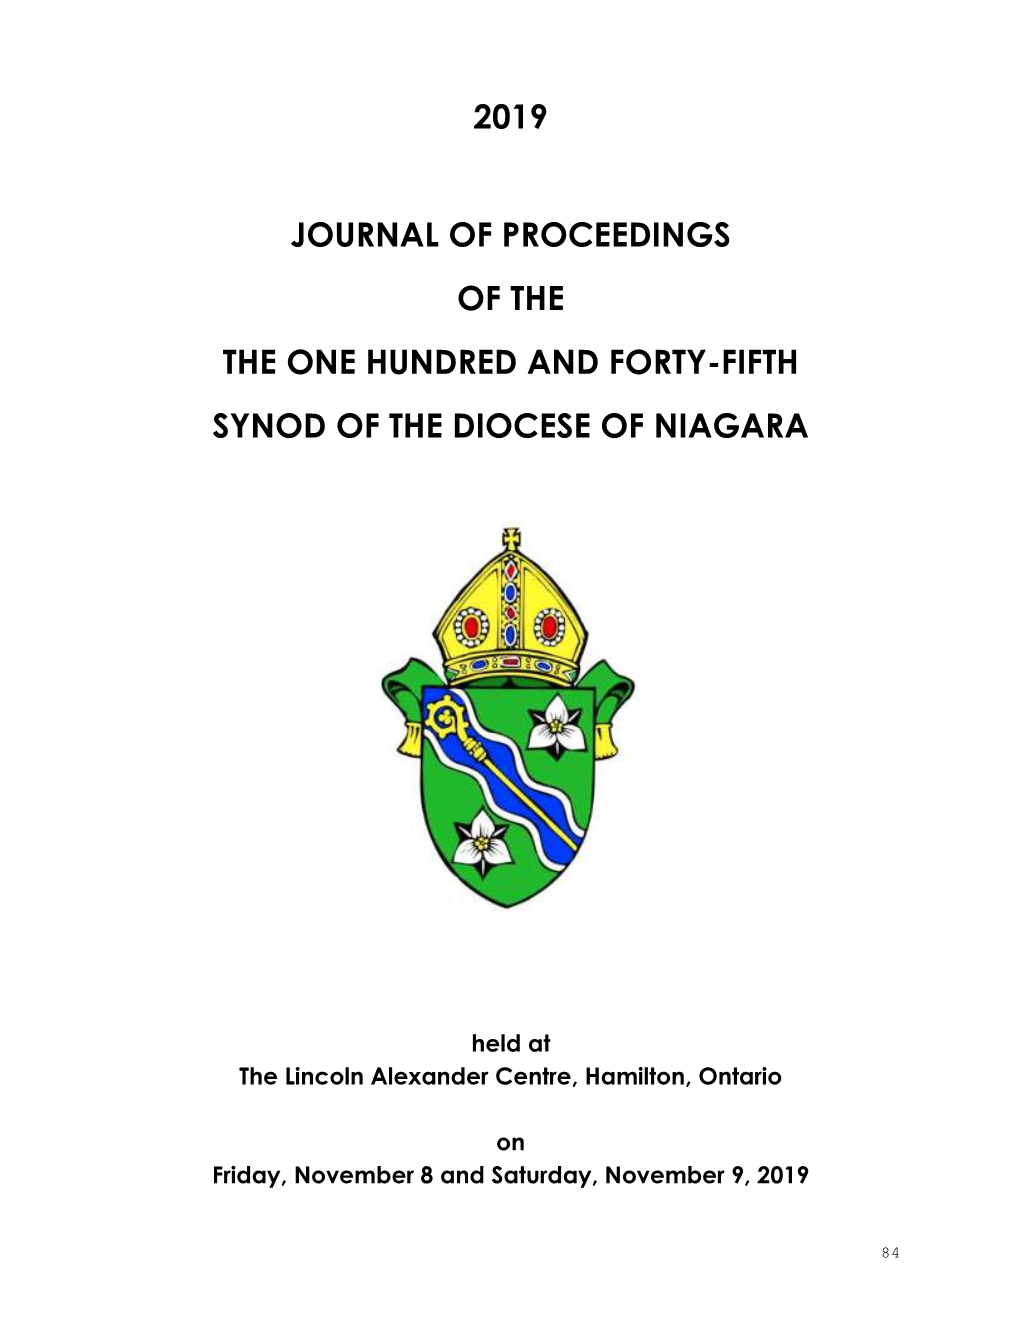 2019 Journal of Proceedings of the the One Hundred and Forty-Fifth Synod Of